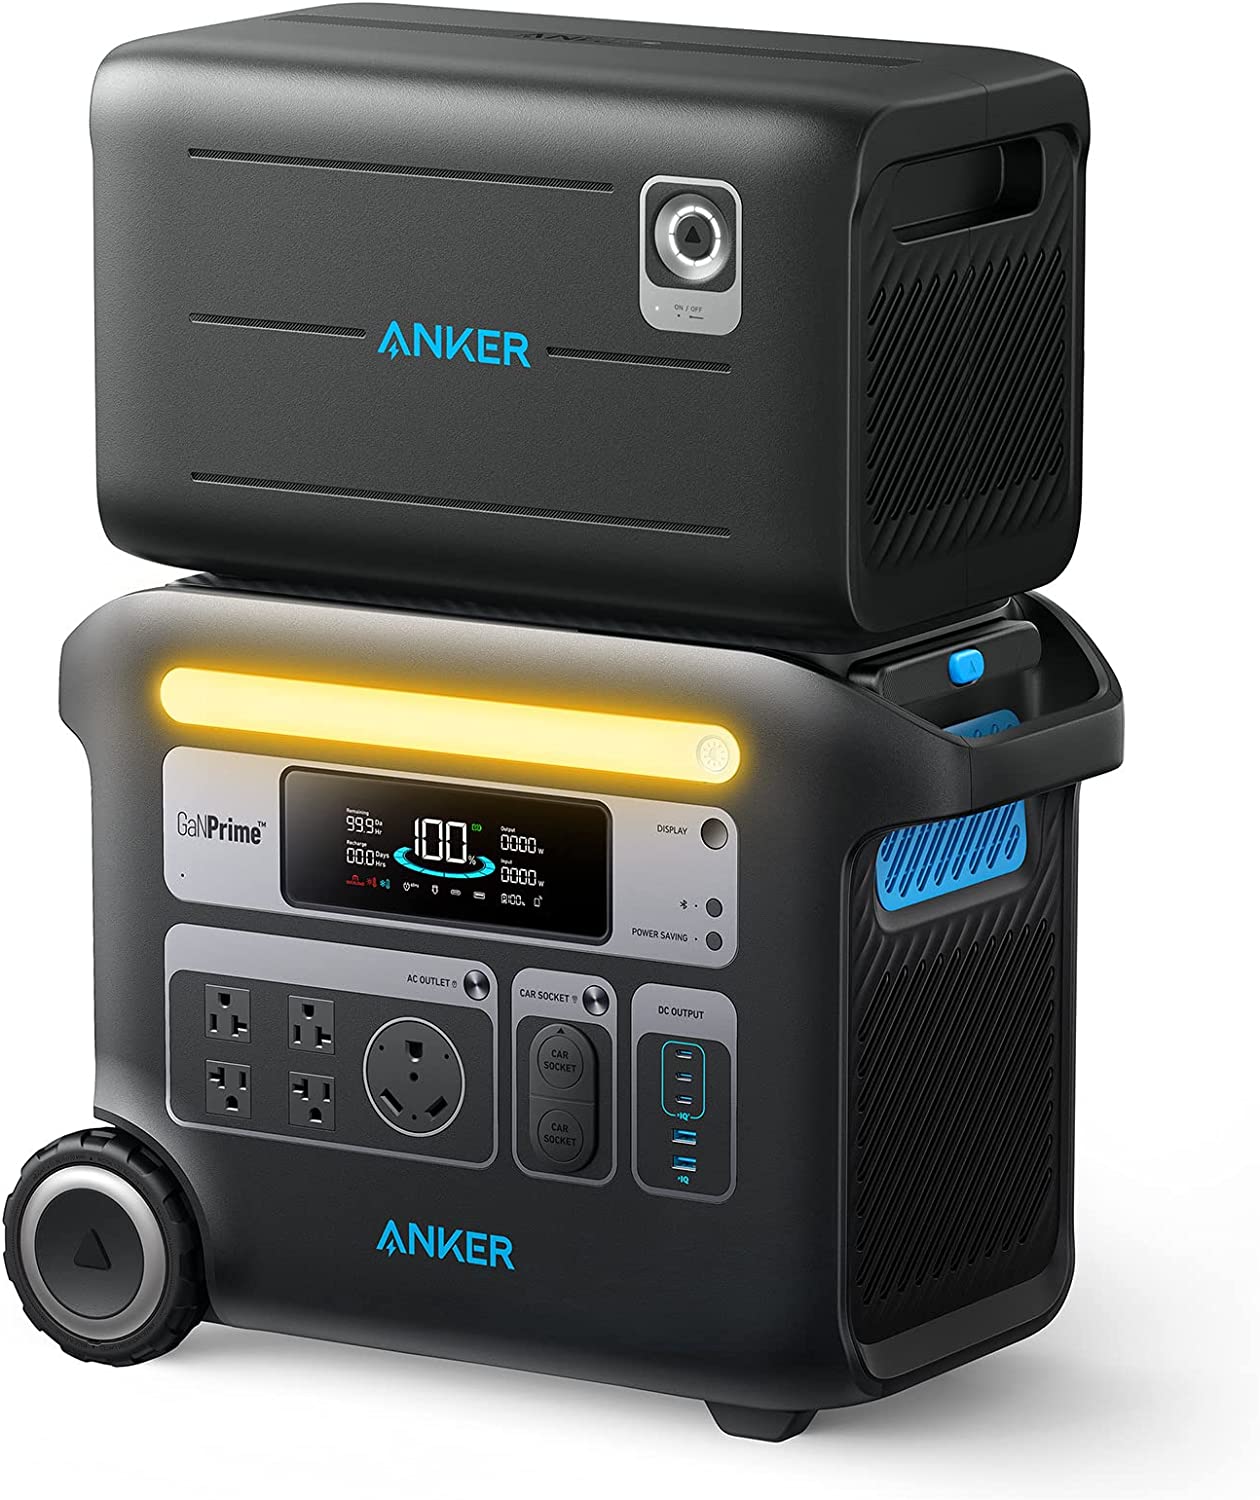 Anker PowerHouse 767 Power Station and 760 Expansion Battery Bundle, 4096Wh LiFePO4 Battery with 4 AC Outlets Up to 2400W, GaNPrime Solar Generator for Home, Outdoor Camping, RV (Solar Panel Optional)